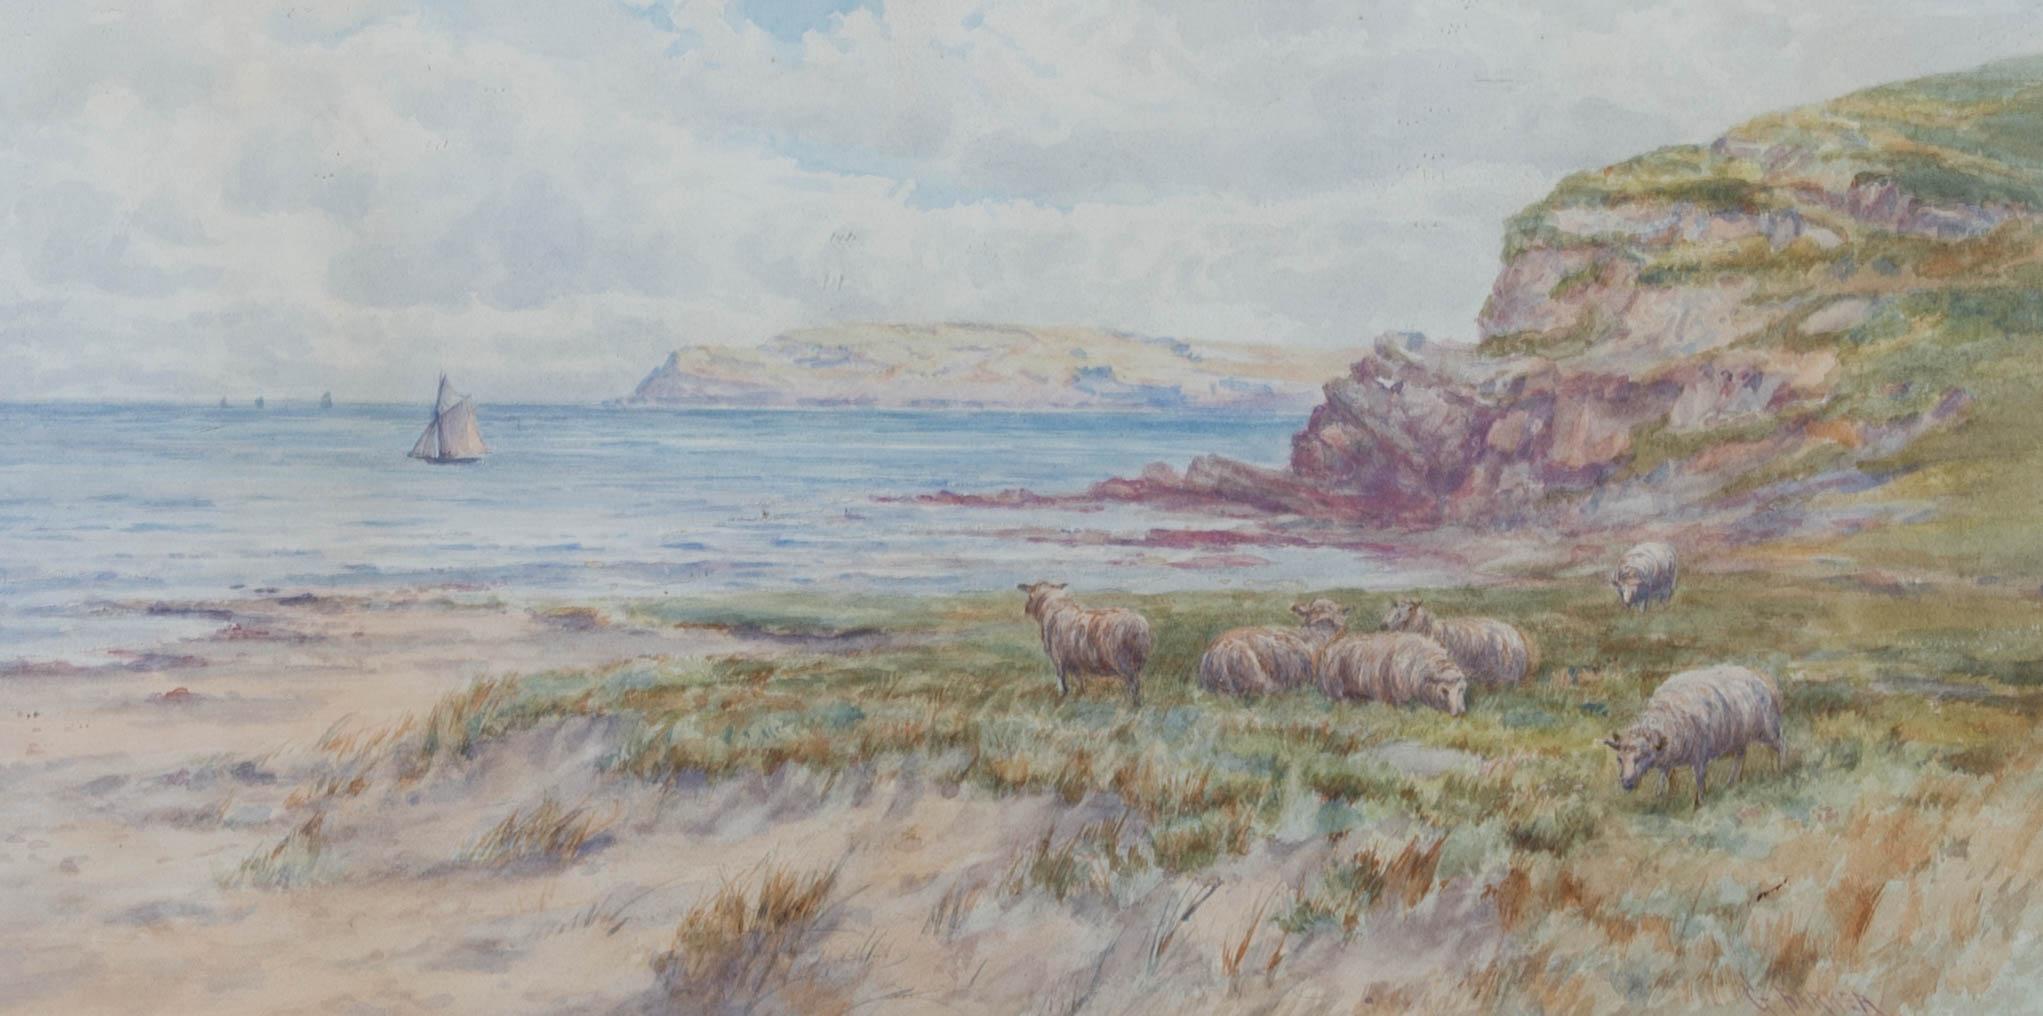 A coastal scene with a flock of sheep grazing in the foreground and a gaff sloop sailing in the middle distance. The composition was perhaps influenced by William Holman Hunt's (1827-1910) 'Our English Coasts' (1852). Presented in a white mount and